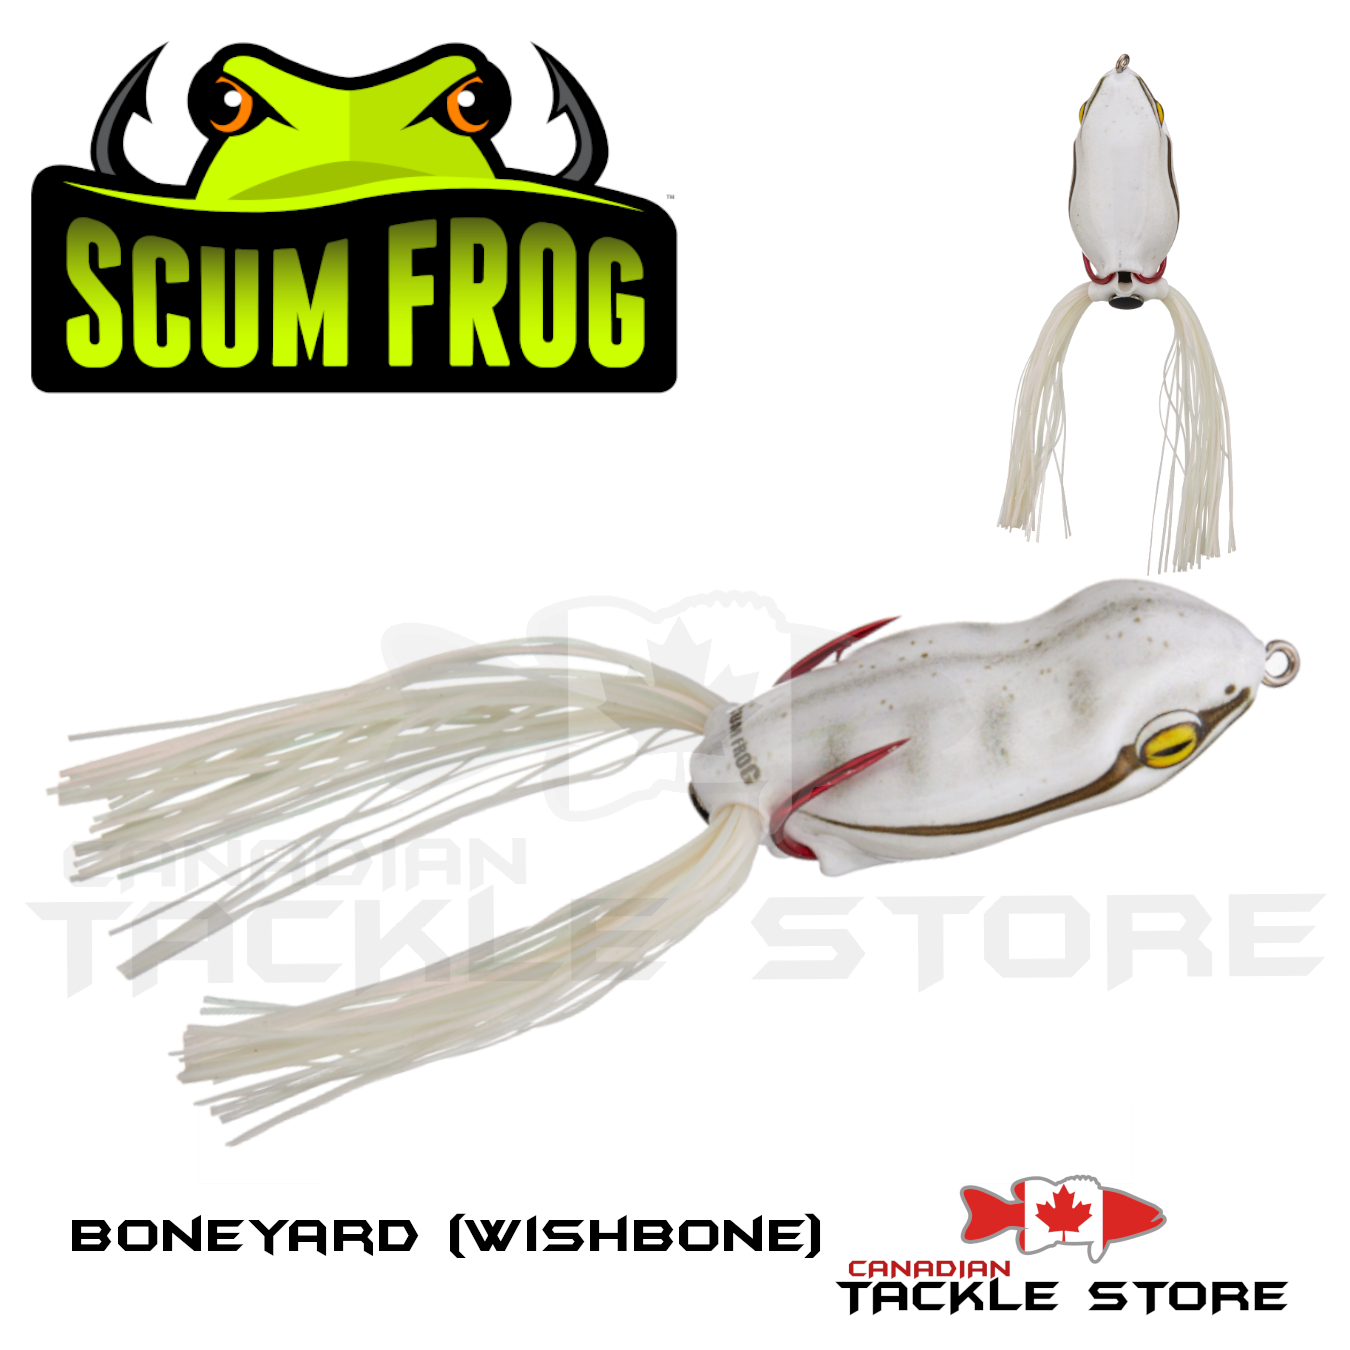 Scum Frog Launch Pitch